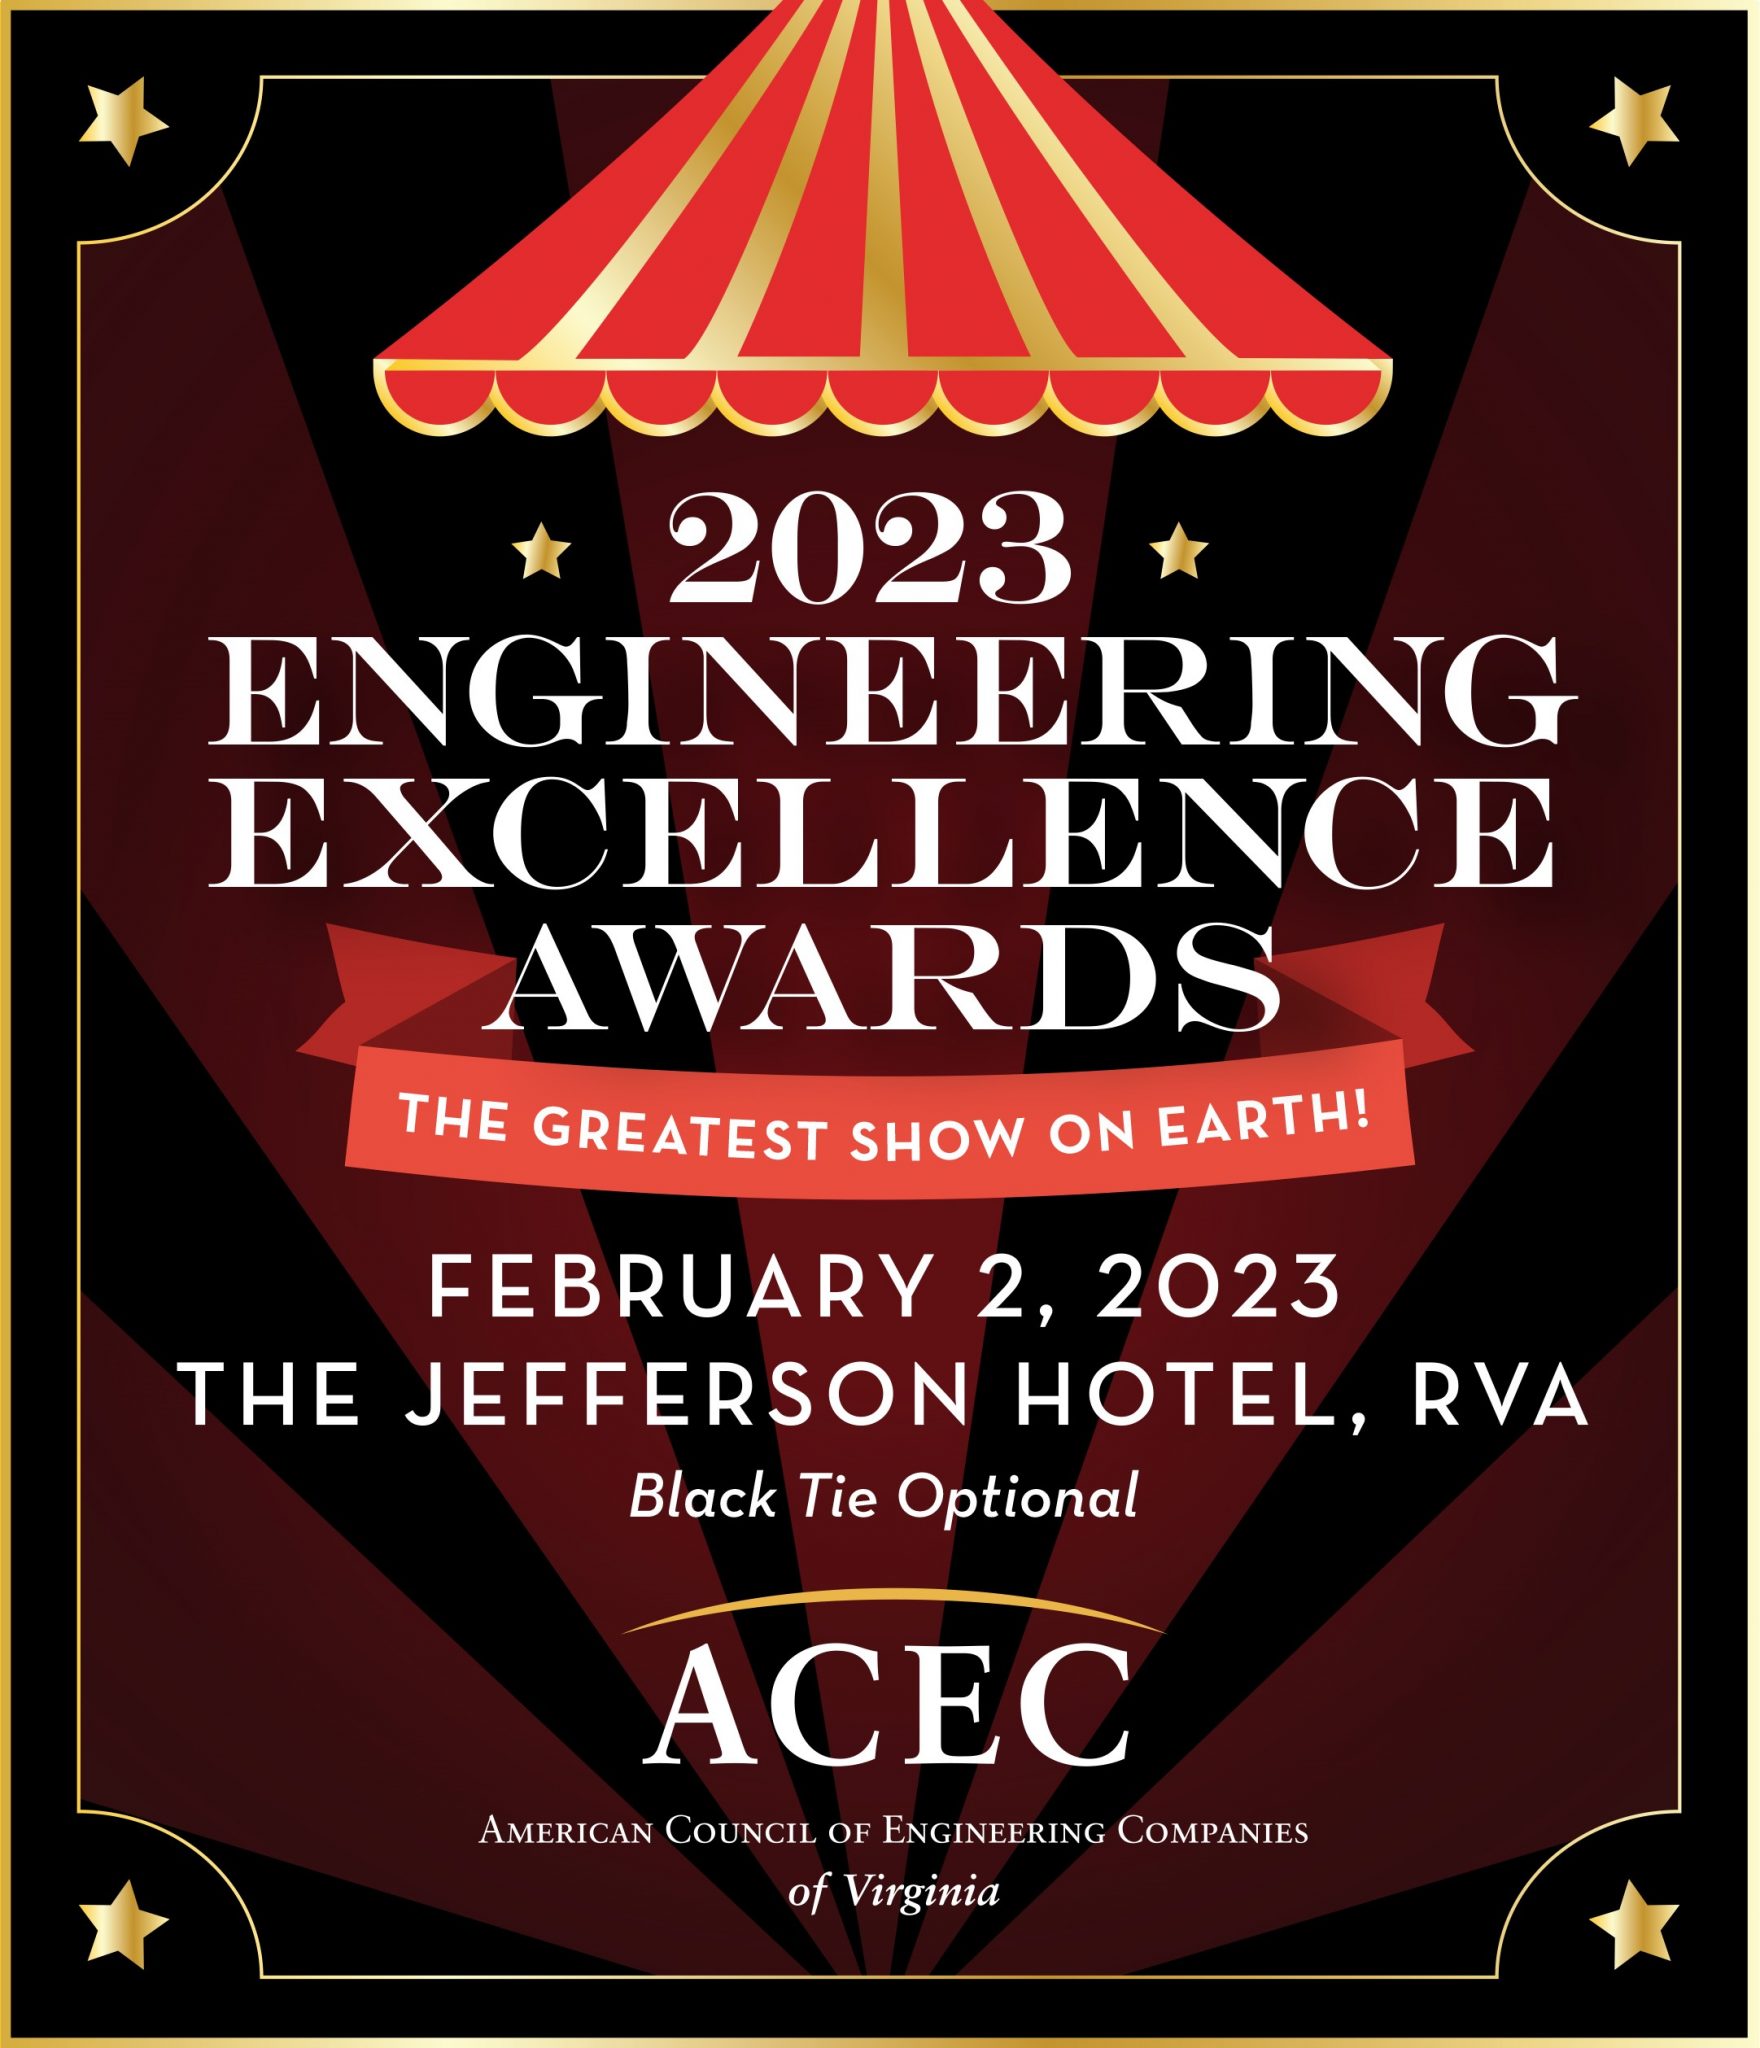 Engineering Excellence Awards American Council of Engineering